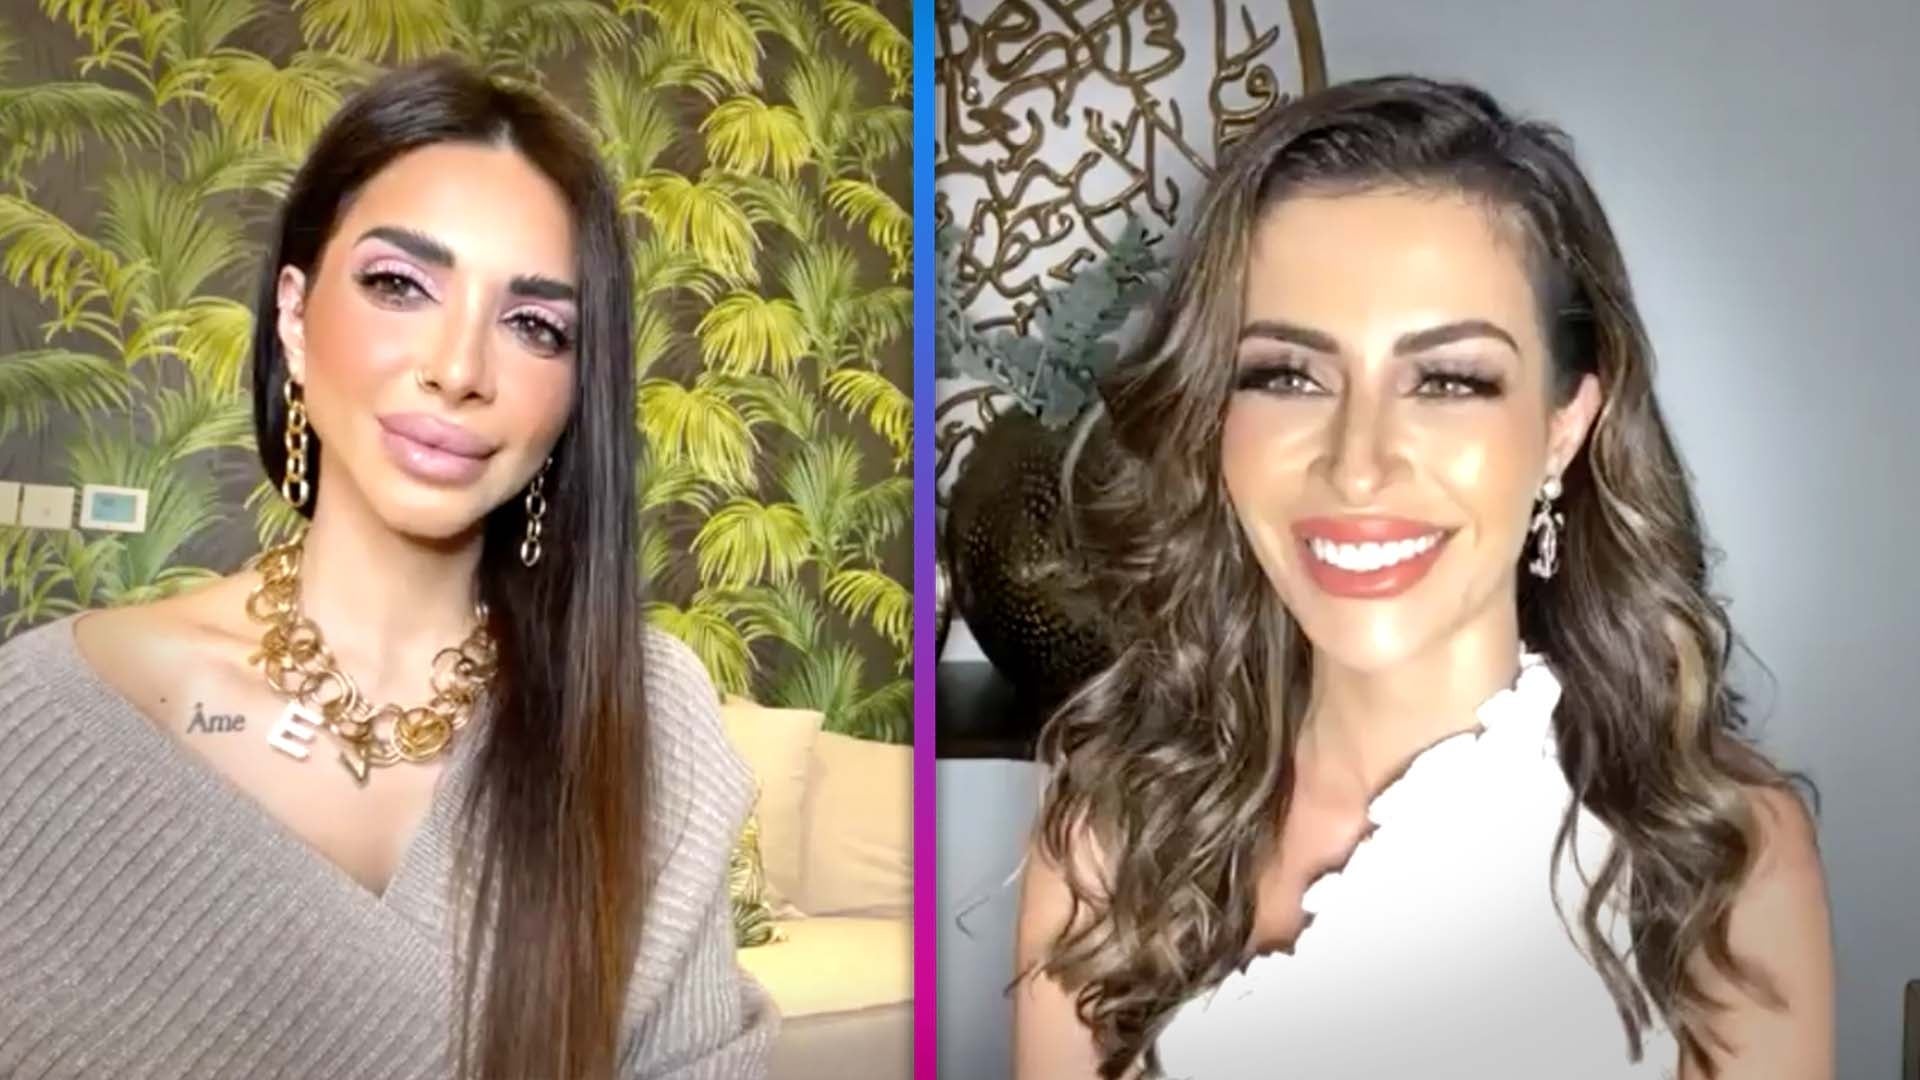 'RHODubai' Cast on What the UAE Really Thinks of 'Real Housewives' Franchise (Exclusive)